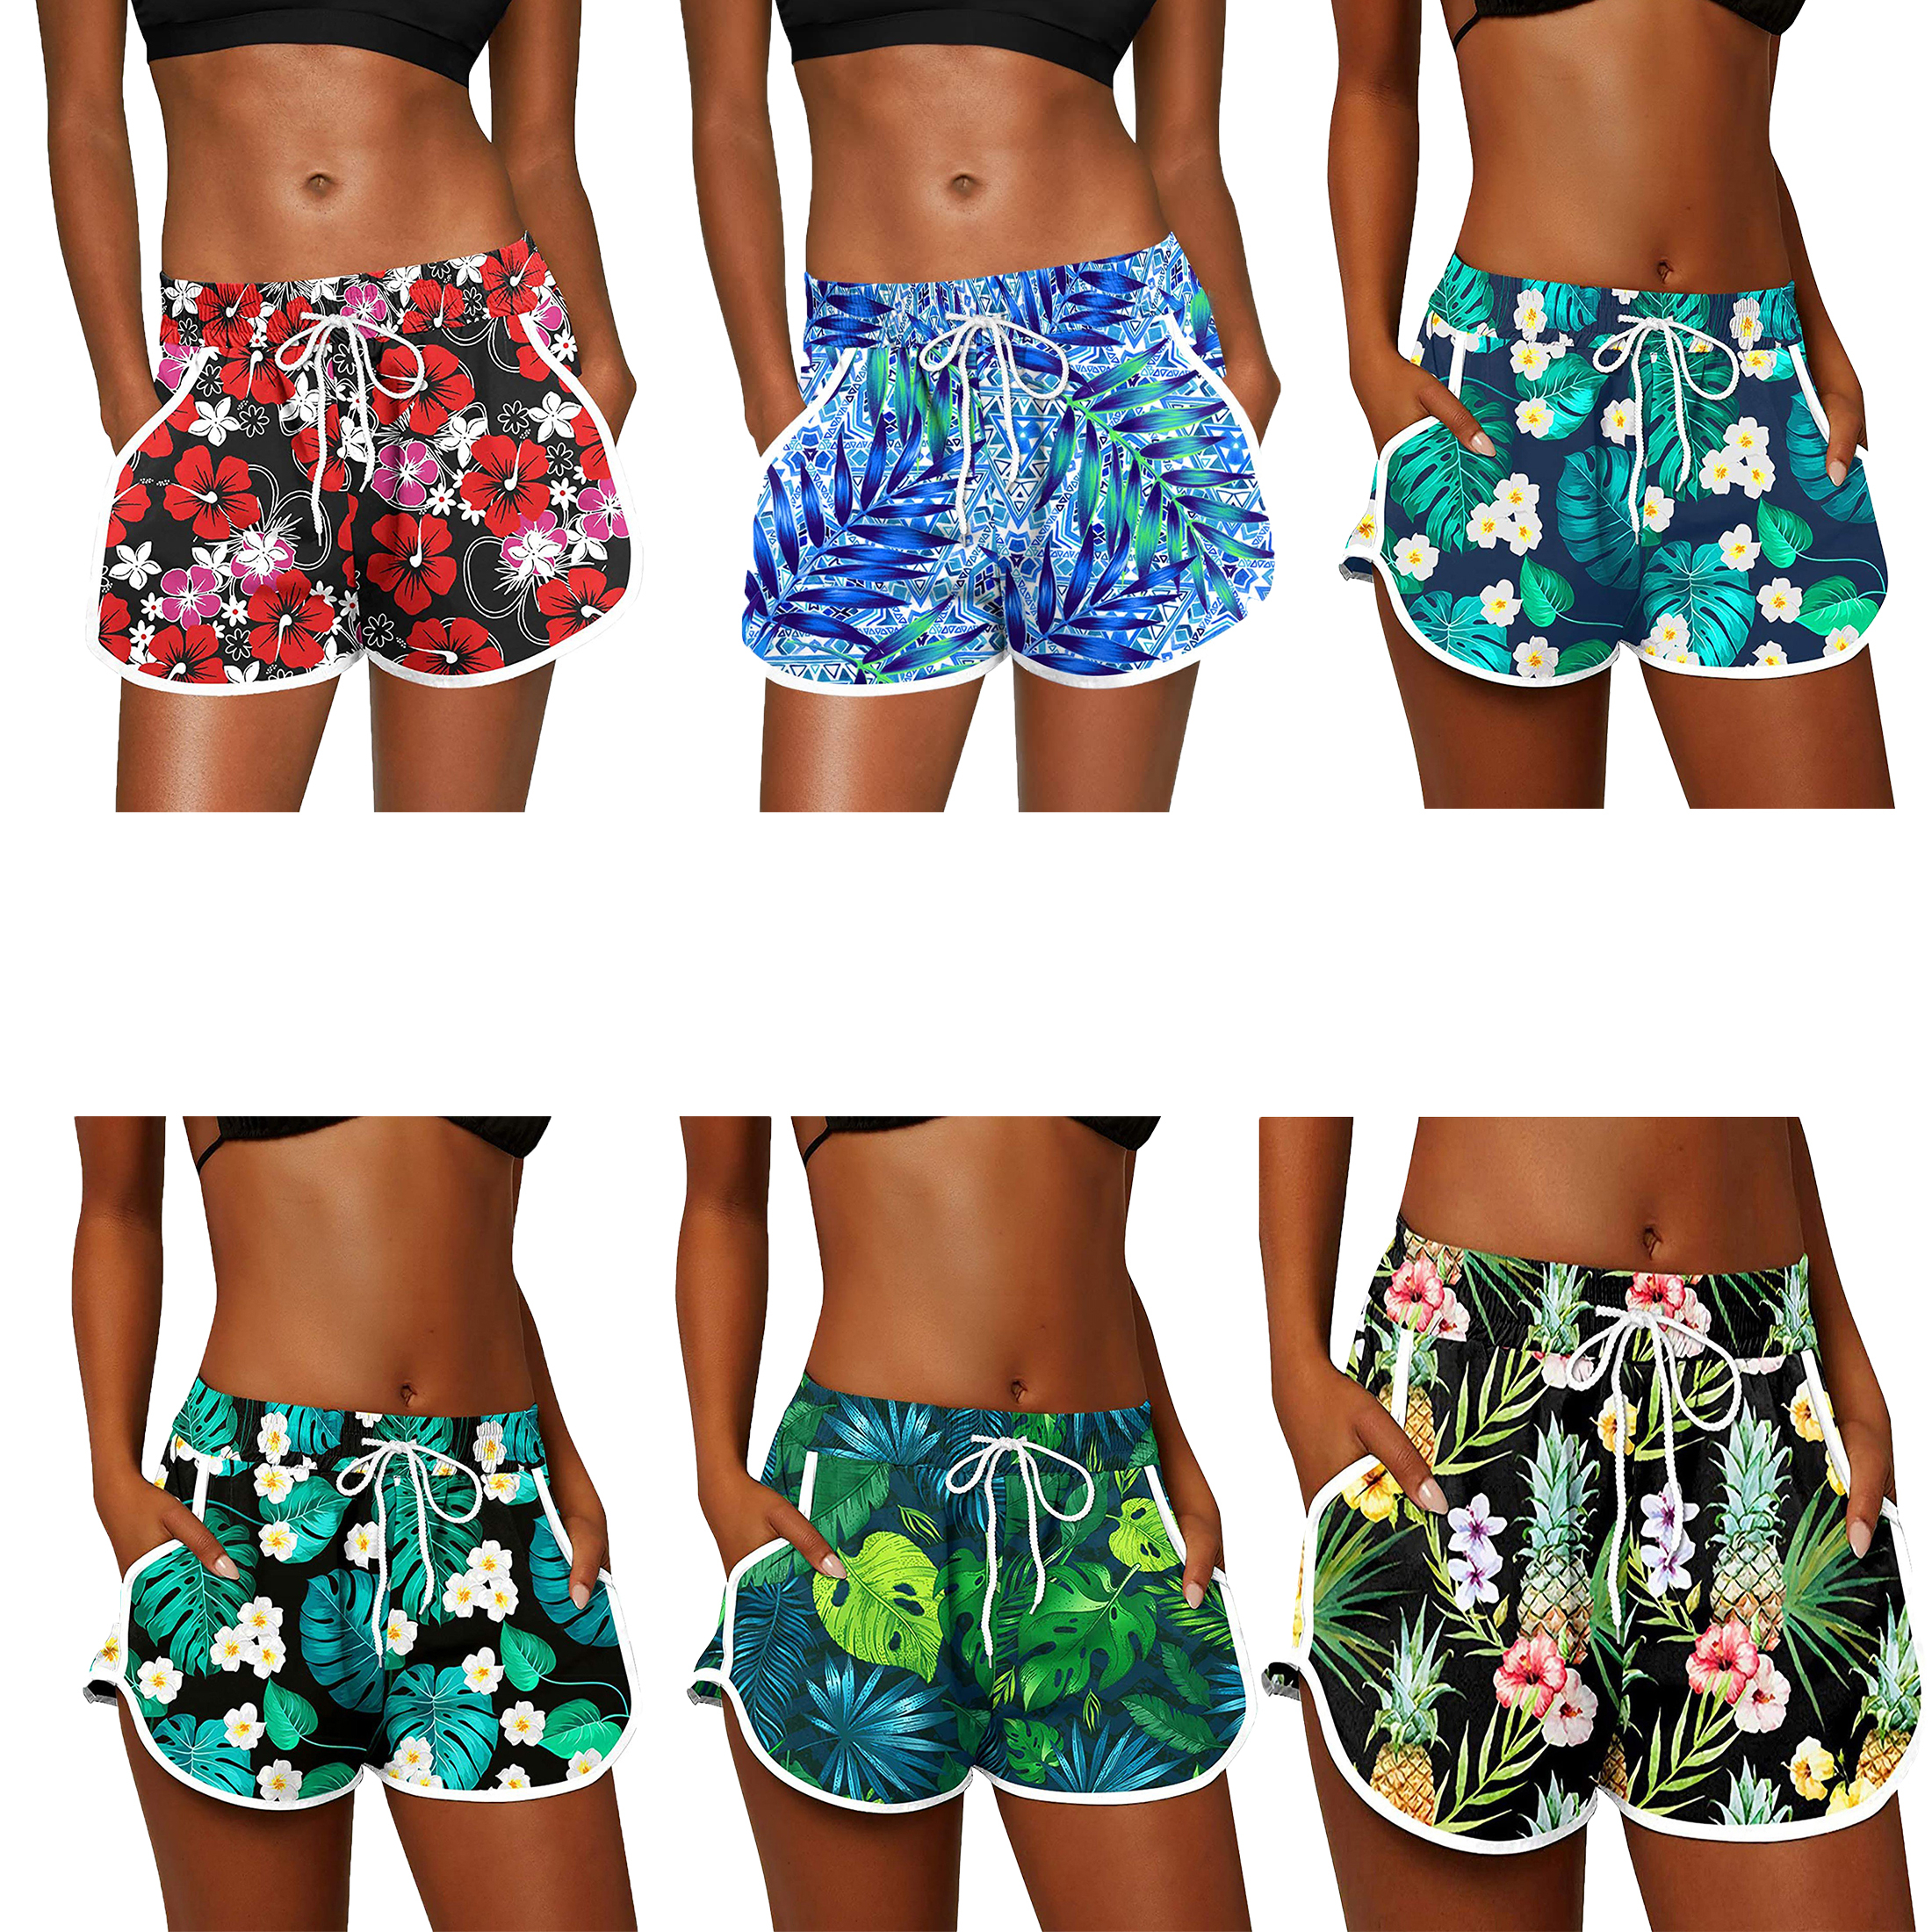 2-Pack Women's Floral Printed Shorts Elastic Waist Drawstring Summer Lounge Wear Pants Casual Dolphin Shorts With Pockets Quick Dry - M